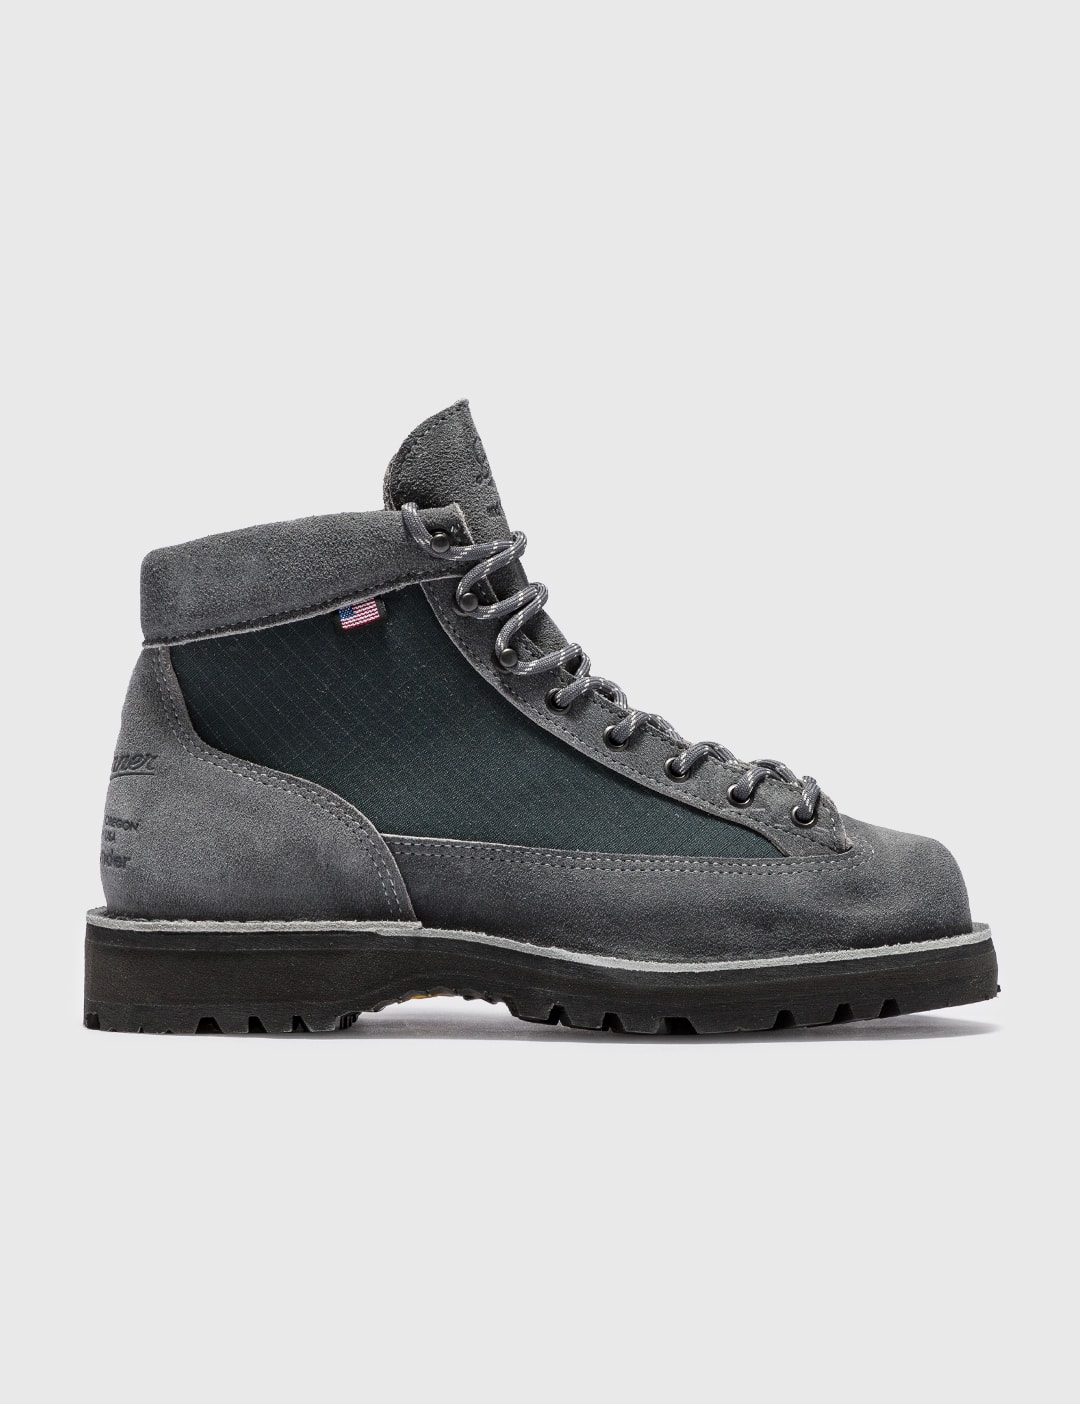 Danner x and Wander Light Boots Placeholder Image